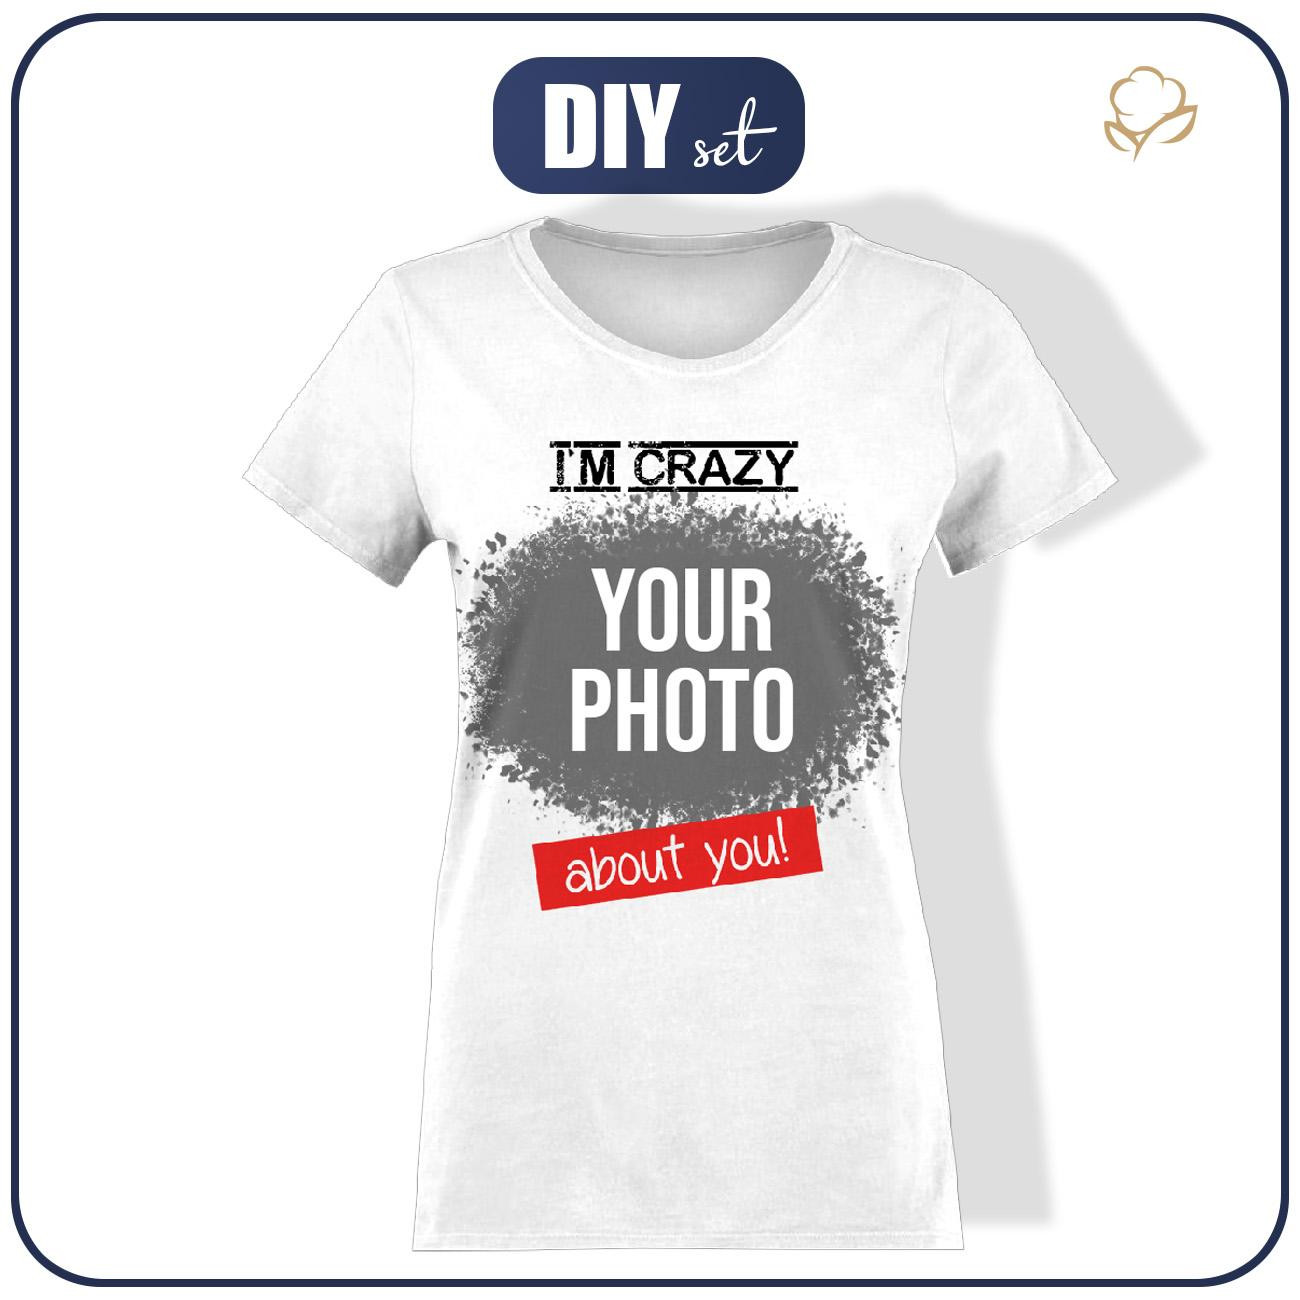 WOMEN'S T-SHIRT - I M CRAZY ABOUT YOU - WITH YOUR OWN PHOTO - sewing set